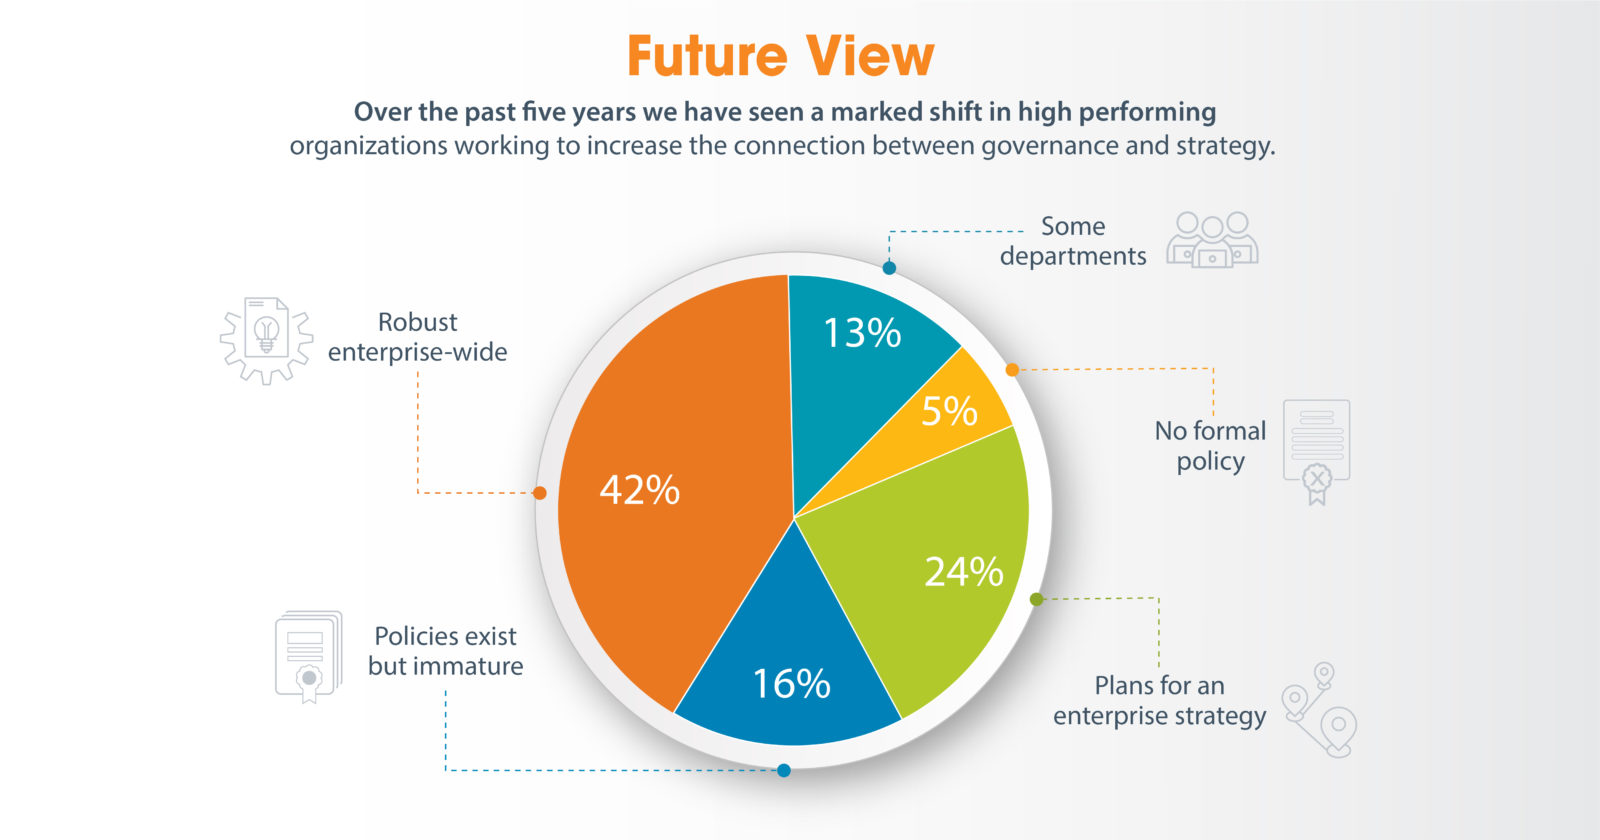 Almost two thirds of organizations lack a robust, enterprise-wide governance plan